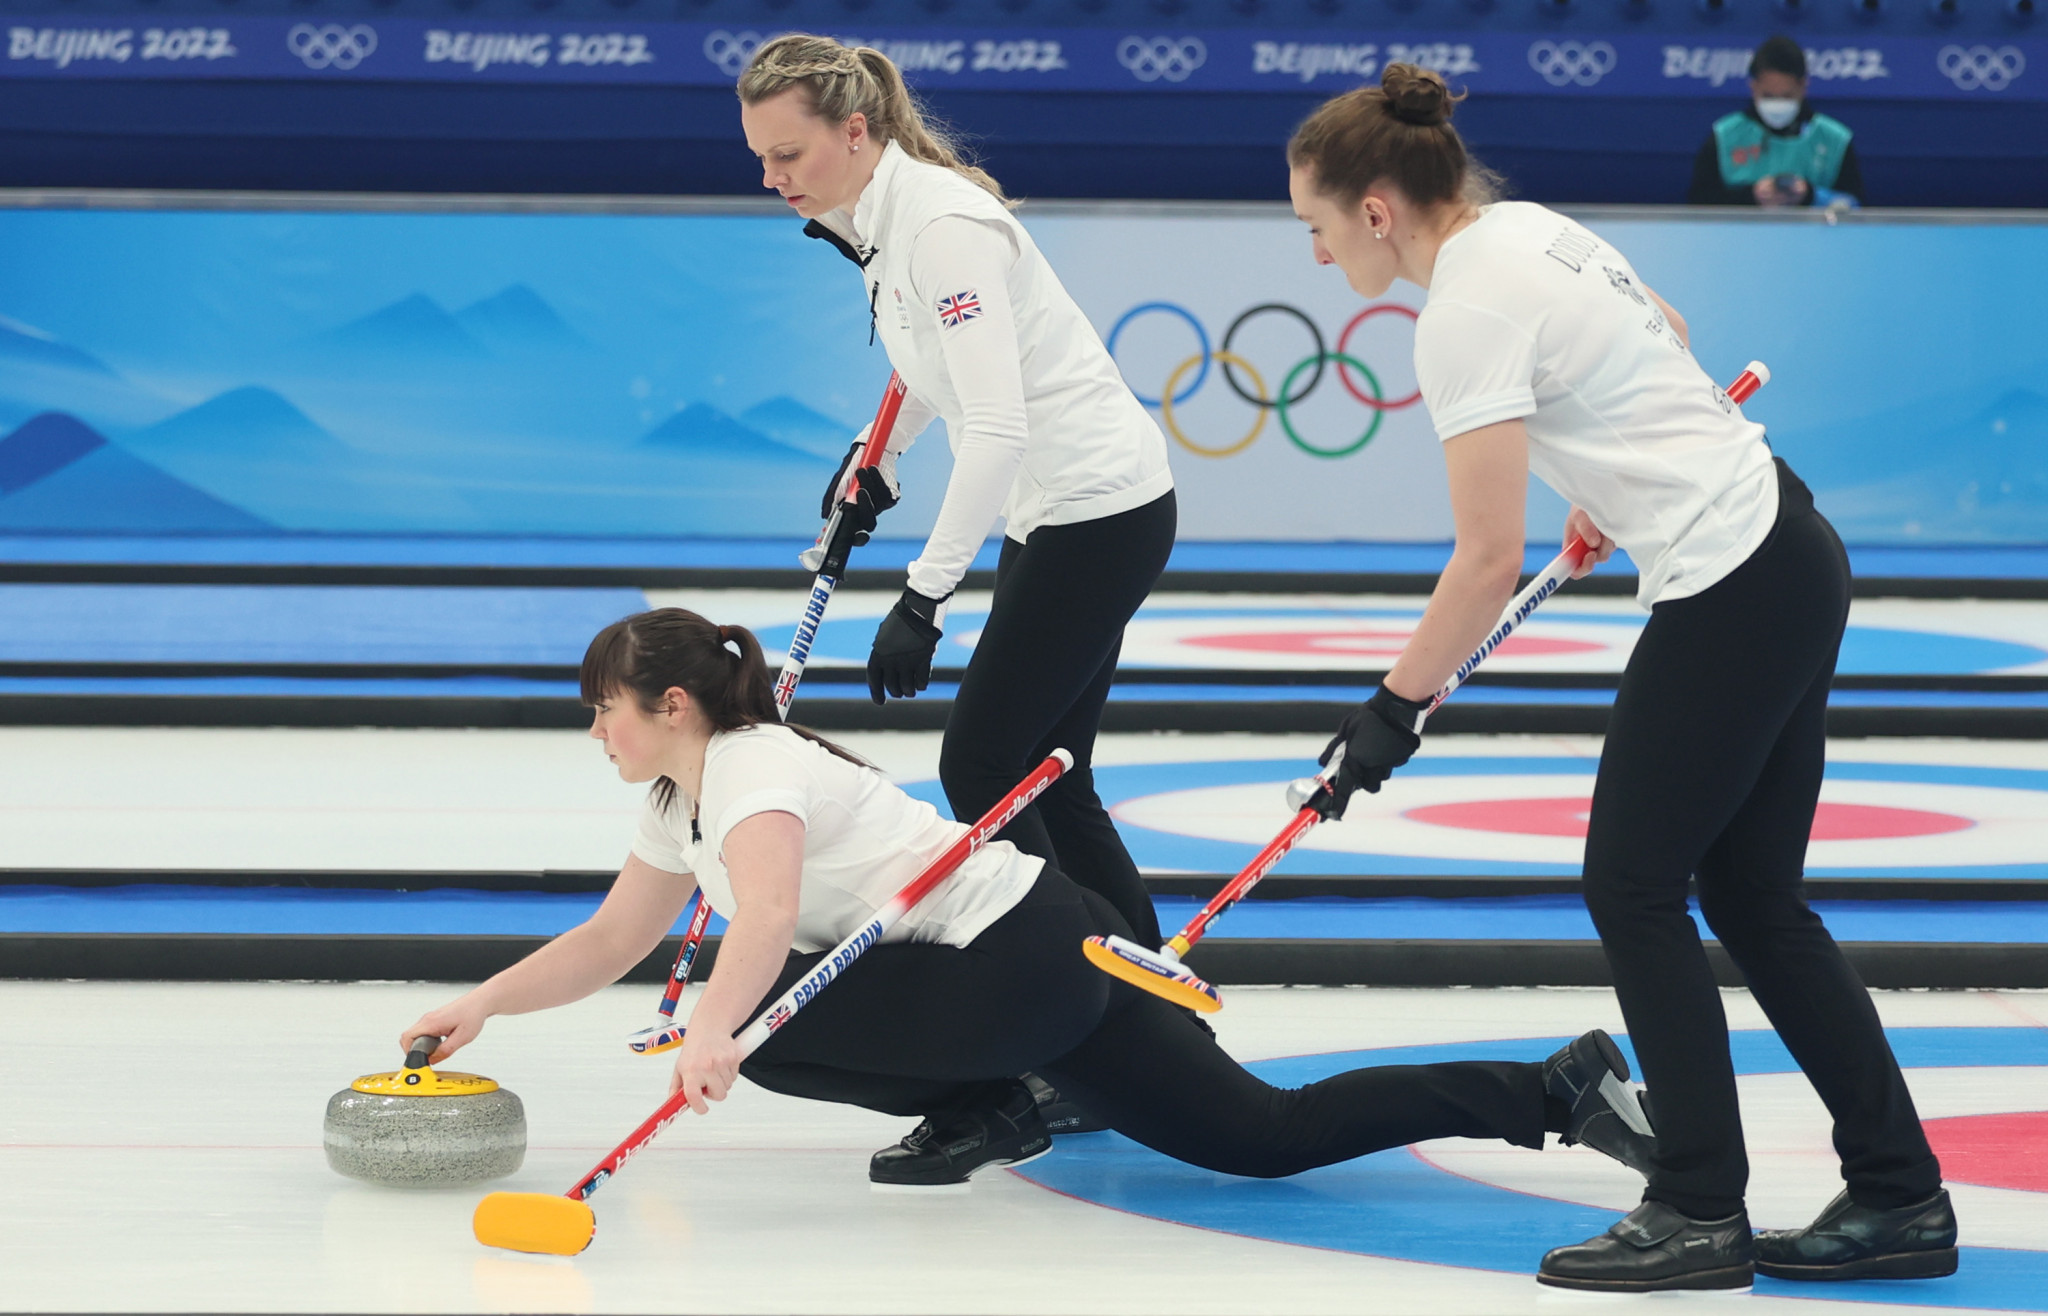 The curling win was the fifth gold medal in the last six Winter Games for Britain, including one in every edition since Vancouver 2010 ©Getty Images